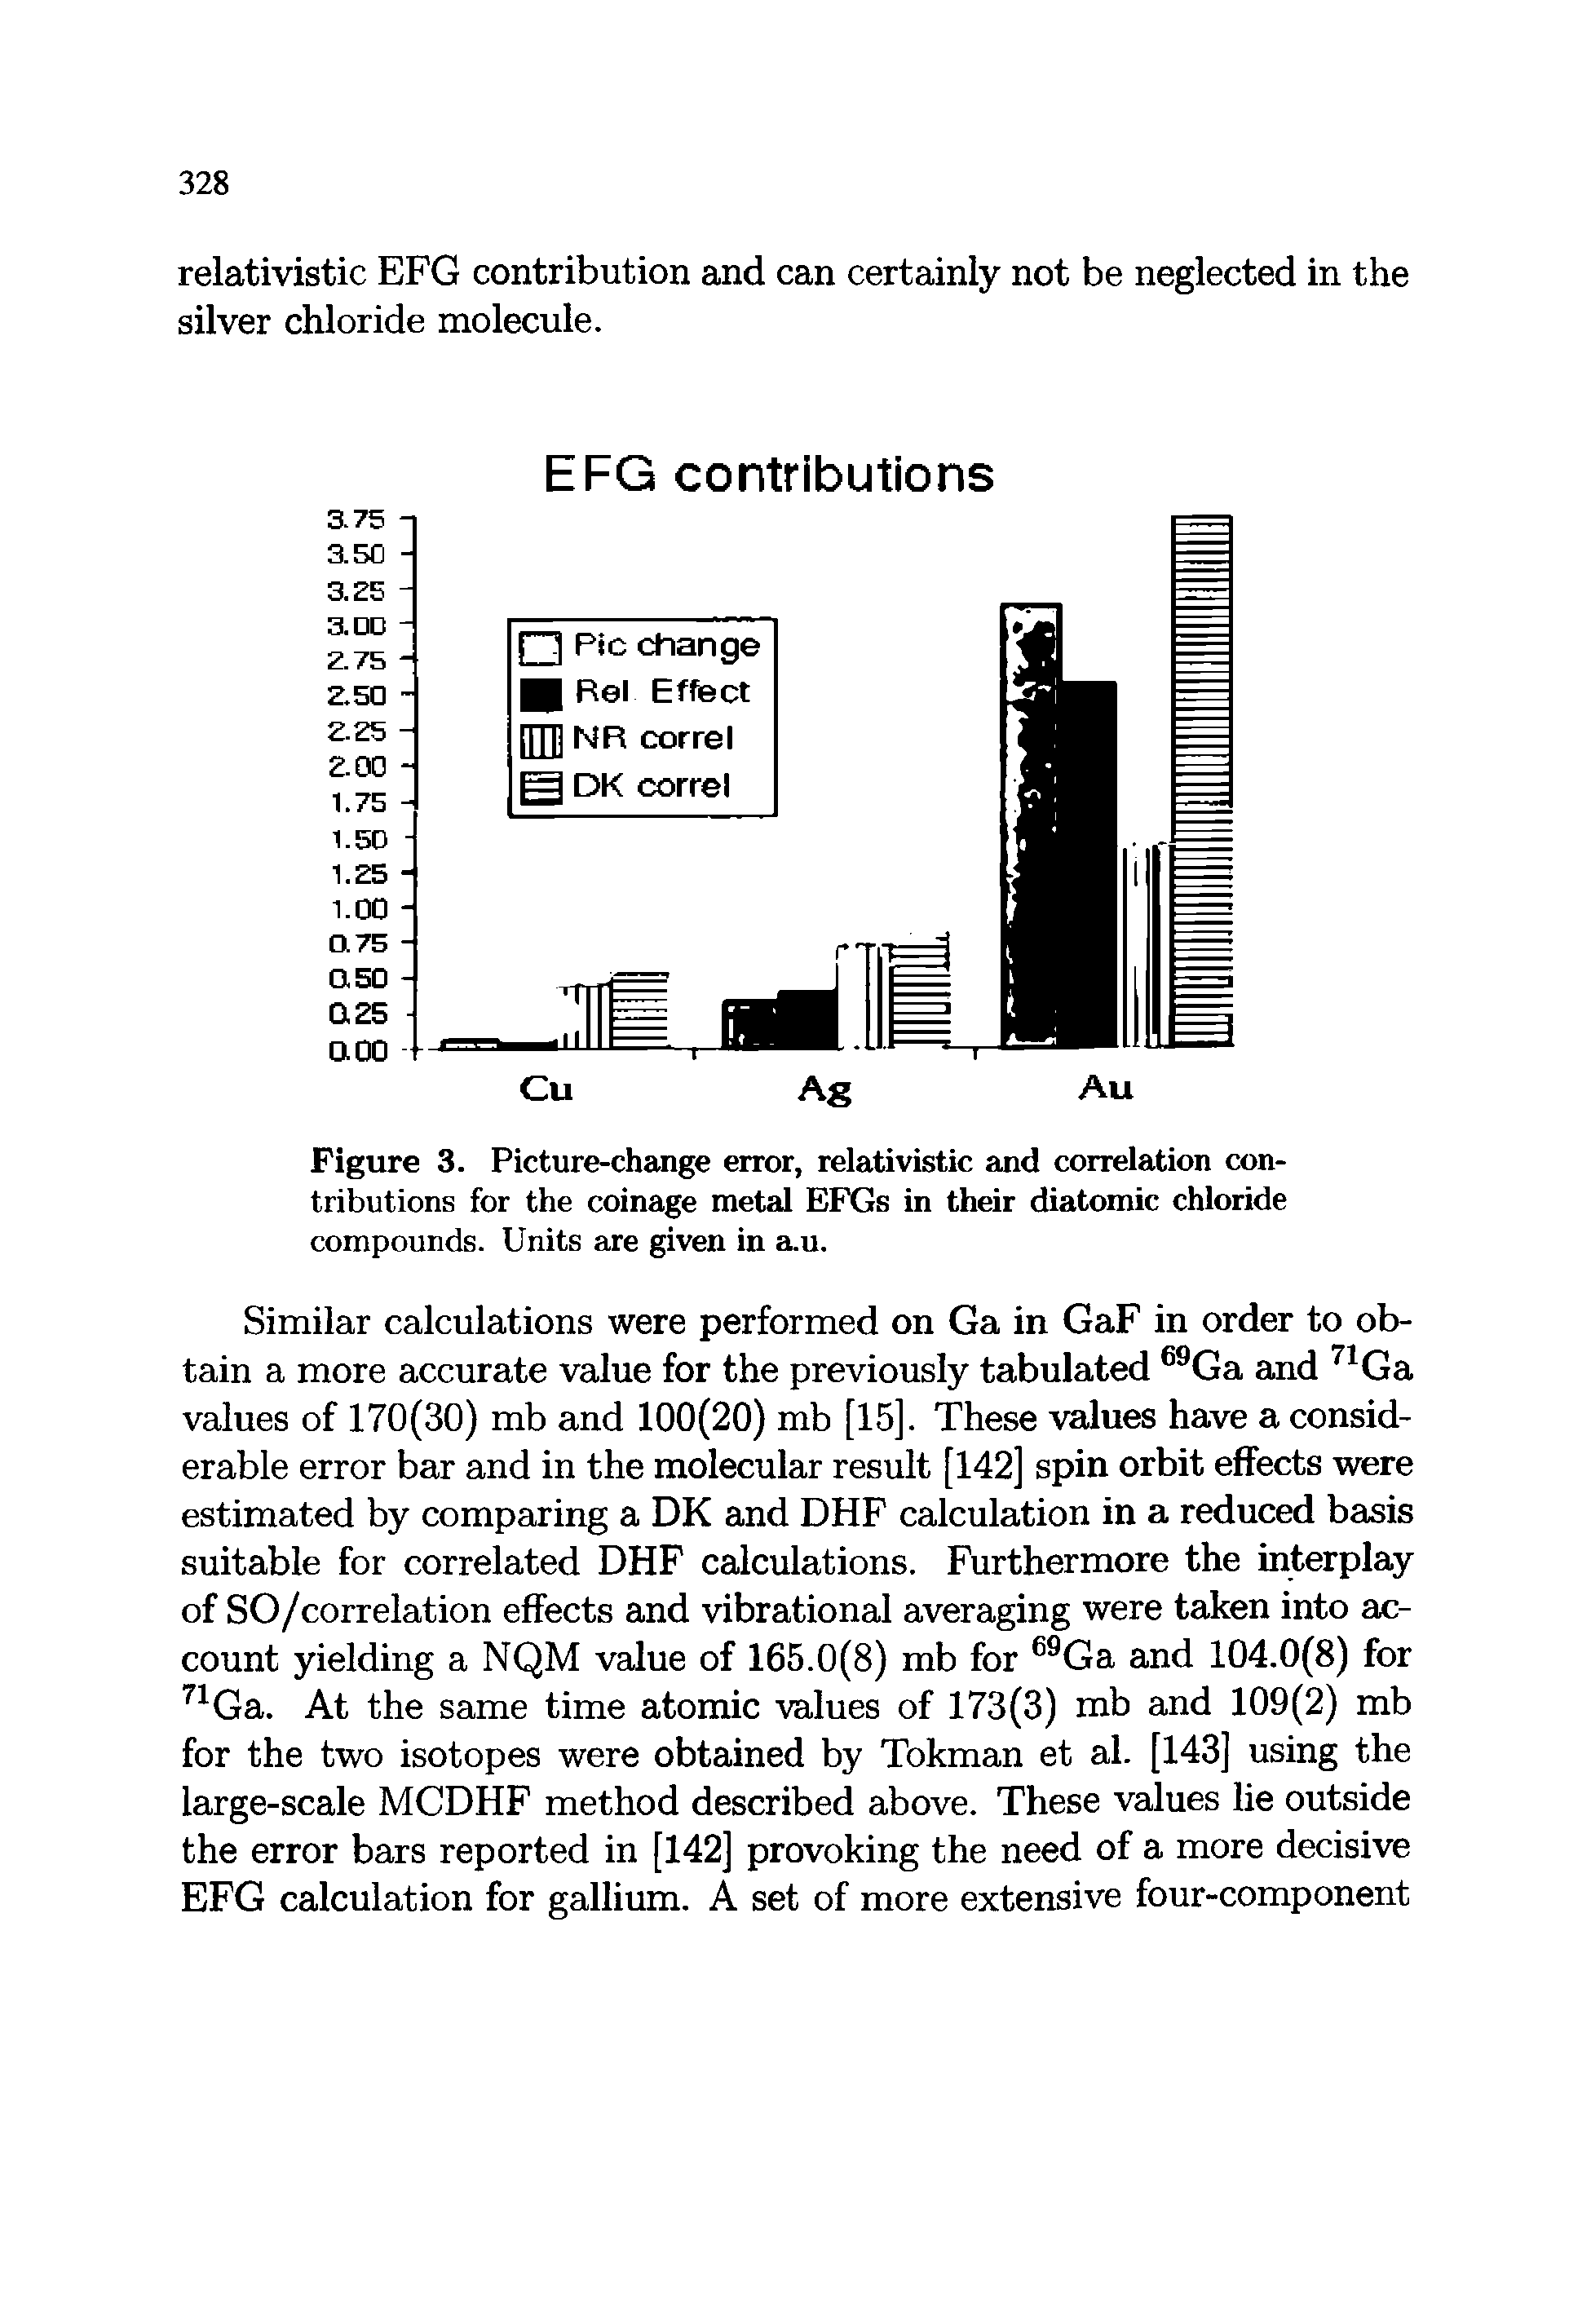 Figure 3. Picture-change error, relativistic and correlation contributions for the coinage metal EFGs in their diatomic chloride compounds. Units are given in a.u.